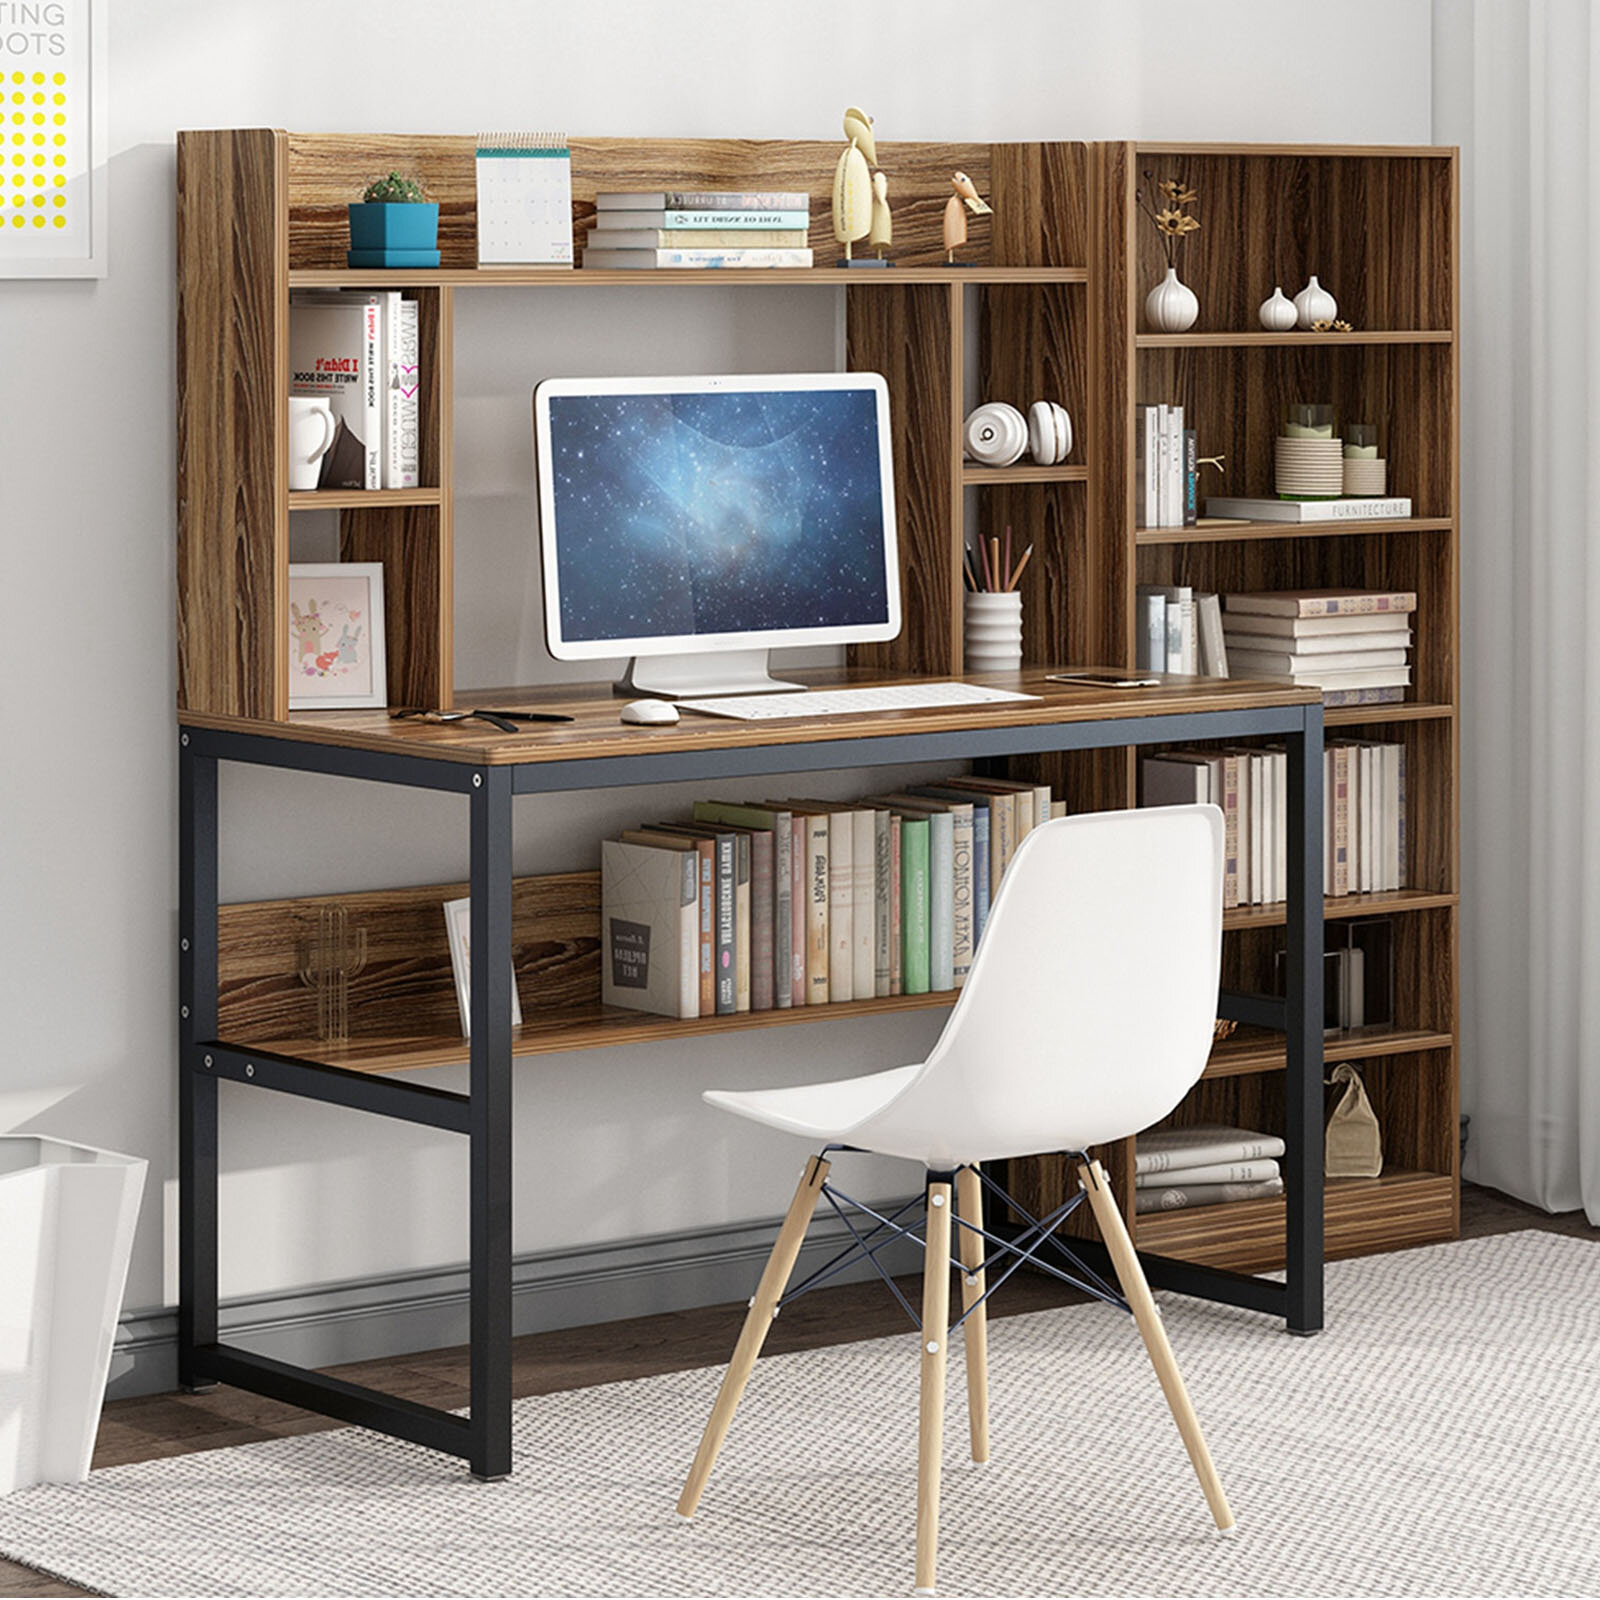 Details about   47" Computer Desk Writing Study Table Workstation w/Hutch & Bookshelf Coffee 